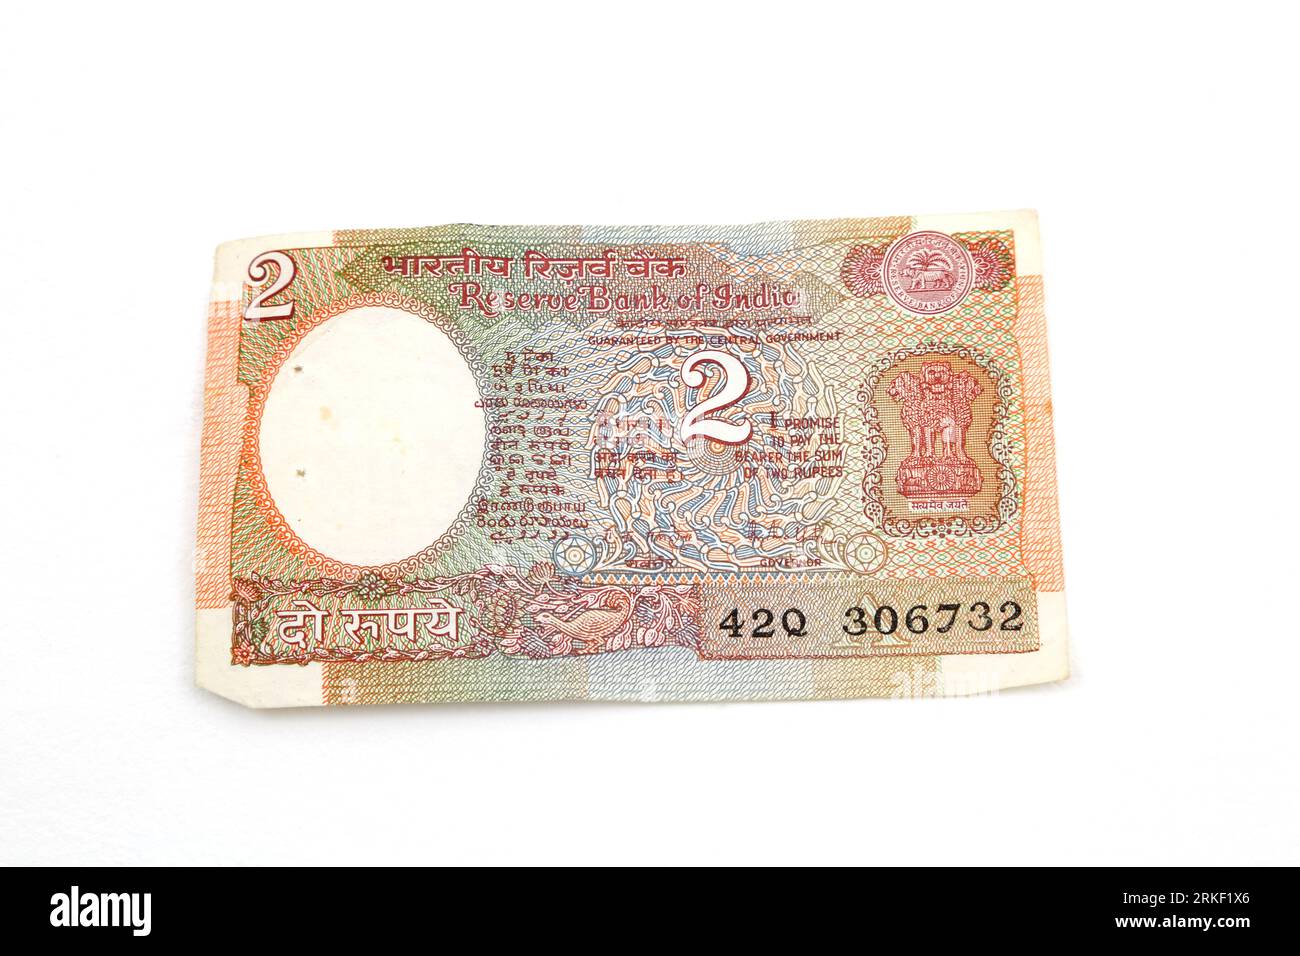 Reserve Bank of India Lion Capital Series Banknotes II - 2 Rupees Issued 1975-1997 Obverse Side Showing the Lion Capitol of Ashoka Stock Photo